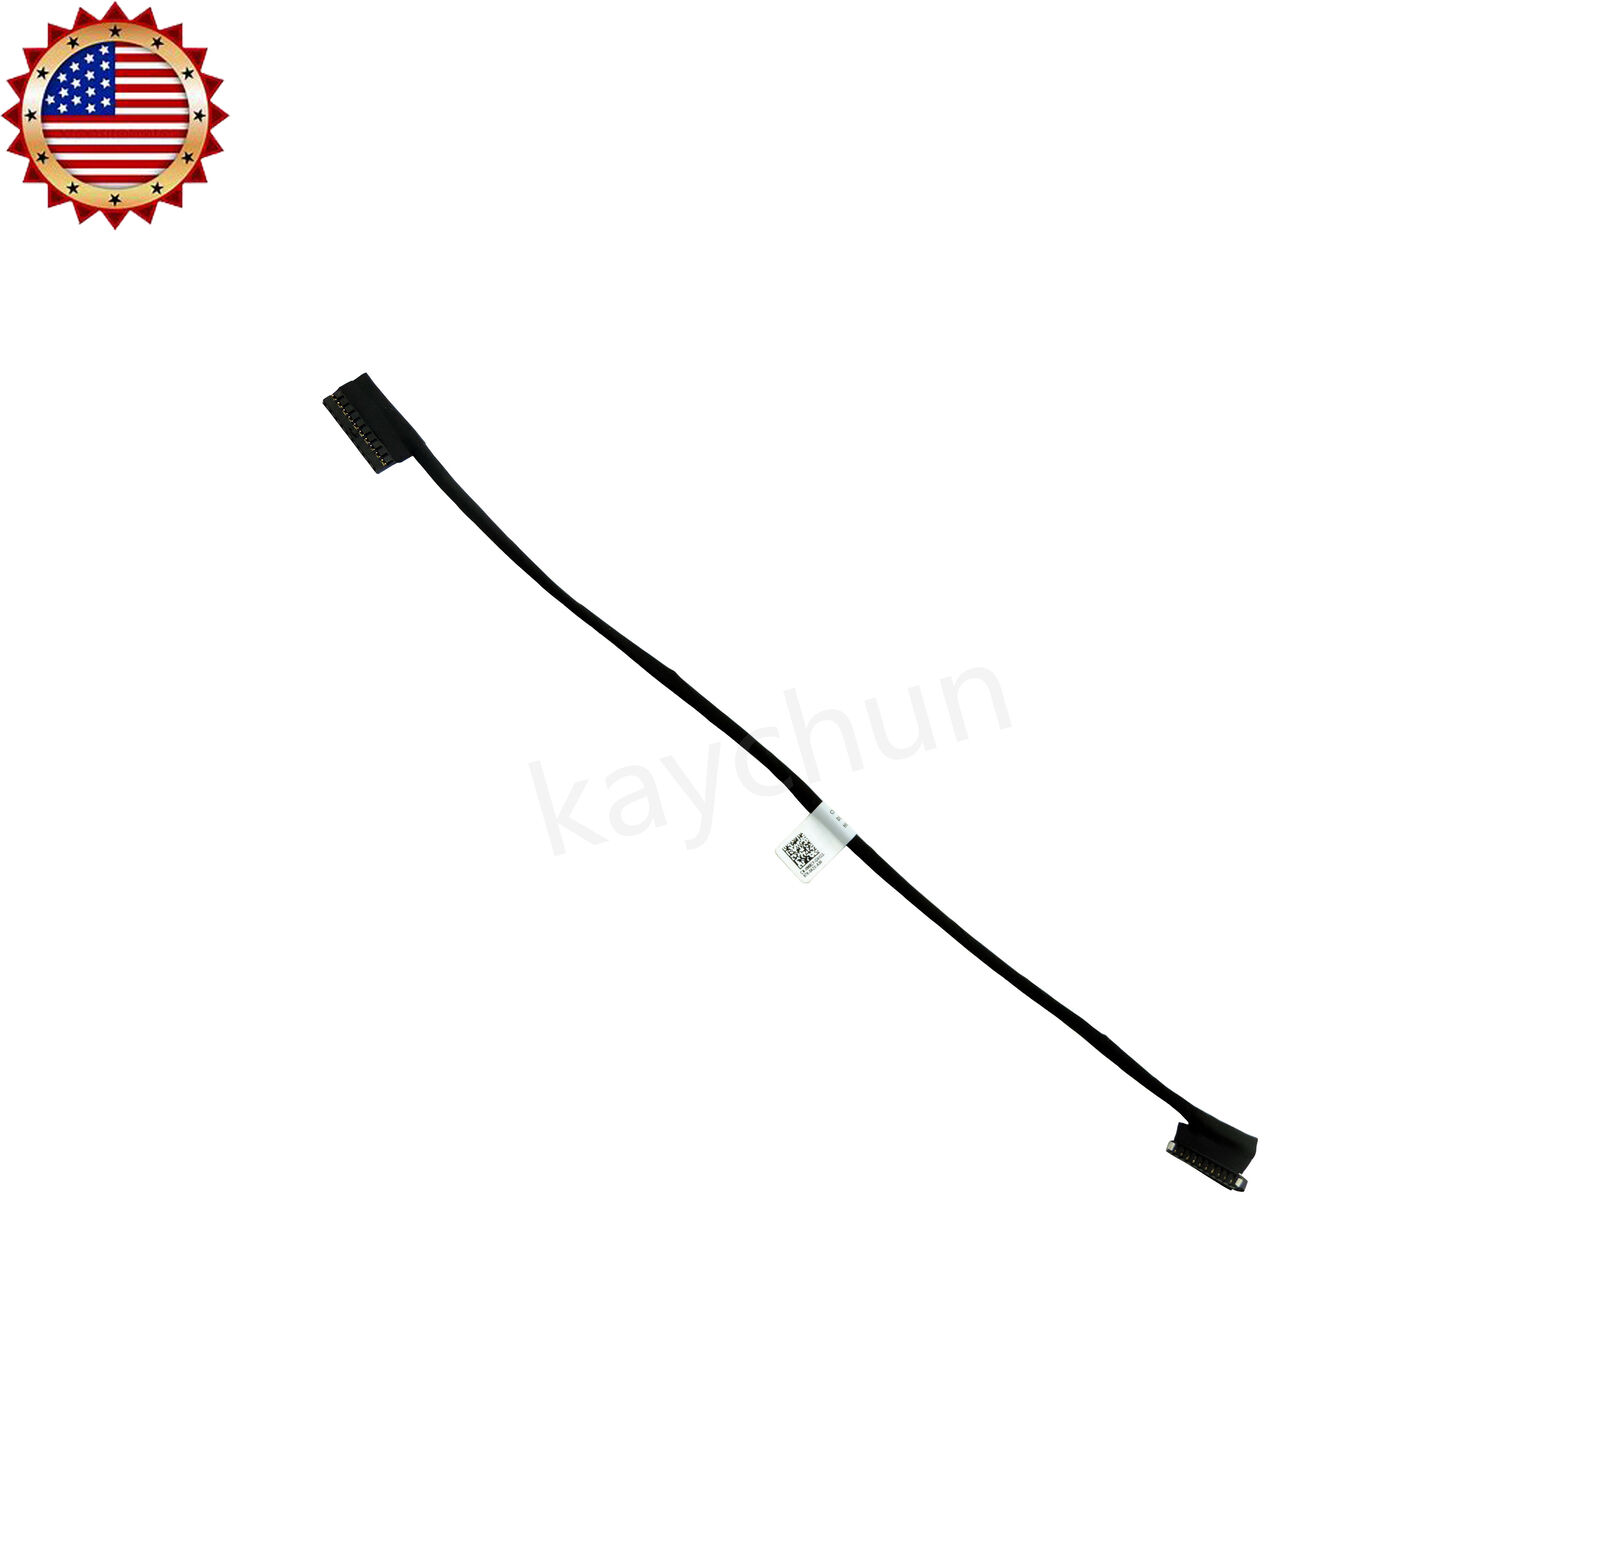 10pcs Original Battery Cable connector wire For Dell Latitude 5590 5591 Laptop